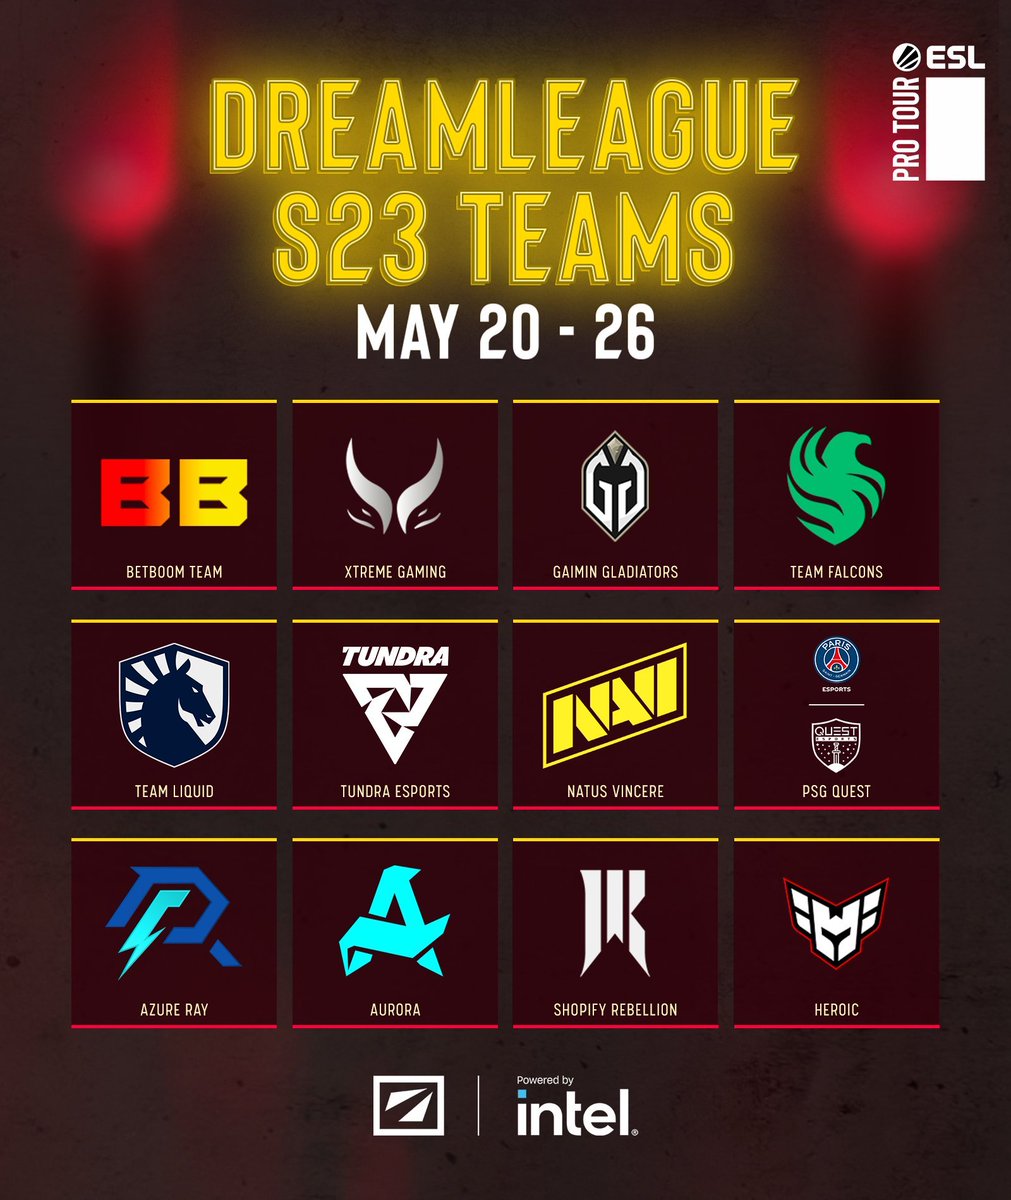 We've got MORE Dota coming your way later this month! #DreamLeague Season 23 runs from May 20th - 26th, and will see 12 teams fight it out for $1,000,000! This will also be the LAST chance for teams to earn EPT Points to qualify directly to the #EsportsWorldCup! 😱